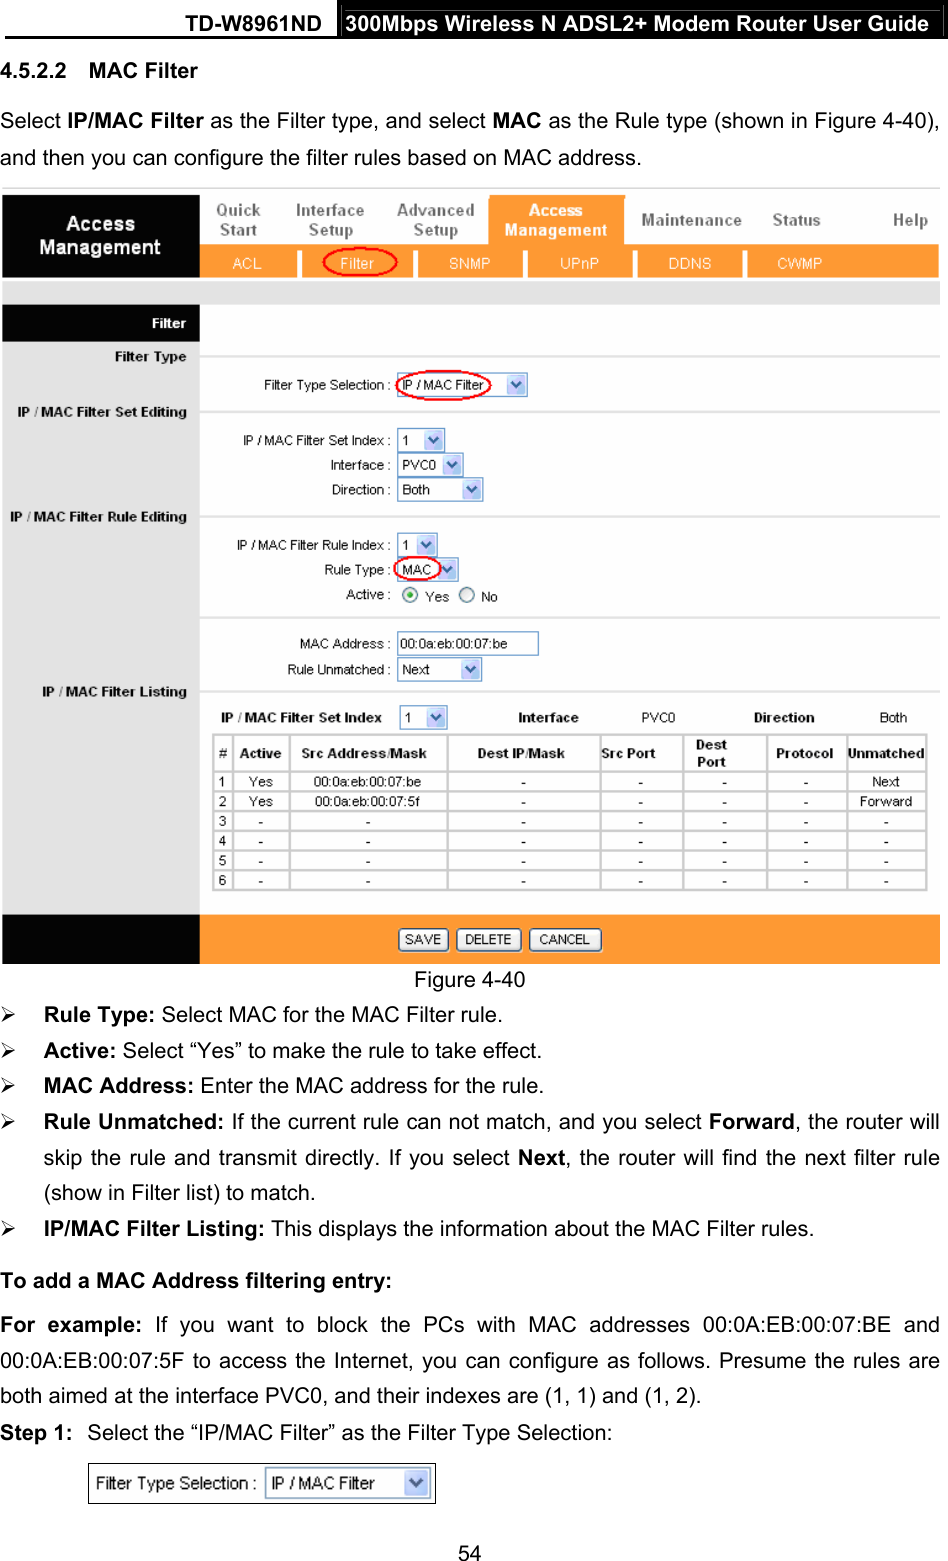 TD-W8961ND  300Mbps Wireless N ADSL2+ Modem Router User Guide  544.5.2.2  MAC Filter Select IP/MAC Filter as the Filter type, and select MAC as the Rule type (shown in Figure 4-40), and then you can configure the filter rules based on MAC address.  Figure 4-40 ¾ Rule Type: Select MAC for the MAC Filter rule. ¾ Active: Select “Yes” to make the rule to take effect. ¾ MAC Address: Enter the MAC address for the rule. ¾ Rule Unmatched: If the current rule can not match, and you select Forward, the router will skip the rule and transmit directly. If you select Next, the router will find the next filter rule (show in Filter list) to match. ¾ IP/MAC Filter Listing: This displays the information about the MAC Filter rules. To add a MAC Address filtering entry: For example: If you want to block the PCs with MAC addresses 00:0A:EB:00:07:BE and 00:0A:EB:00:07:5F to access the Internet, you can configure as follows. Presume the rules are both aimed at the interface PVC0, and their indexes are (1, 1) and (1, 2). Step 1:  Select the “IP/MAC Filter” as the Filter Type Selection:    